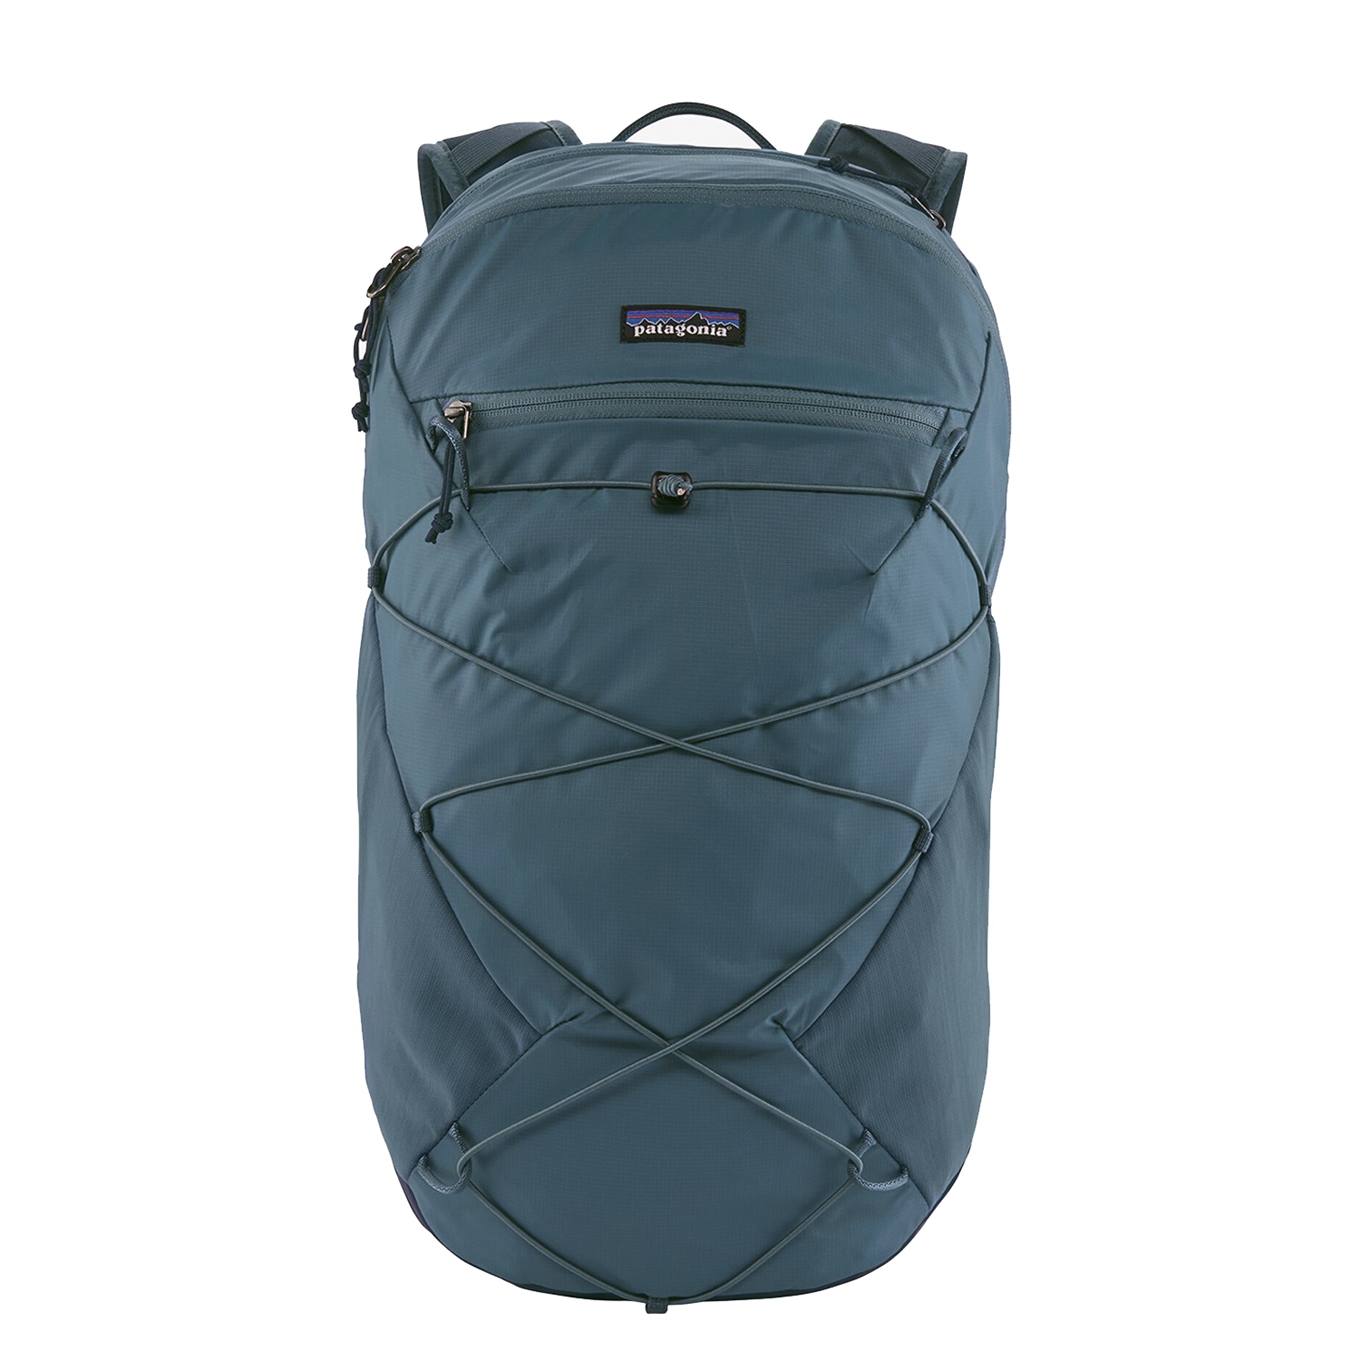 Patagonia Altvia Pack 22L S abalone blue backpack